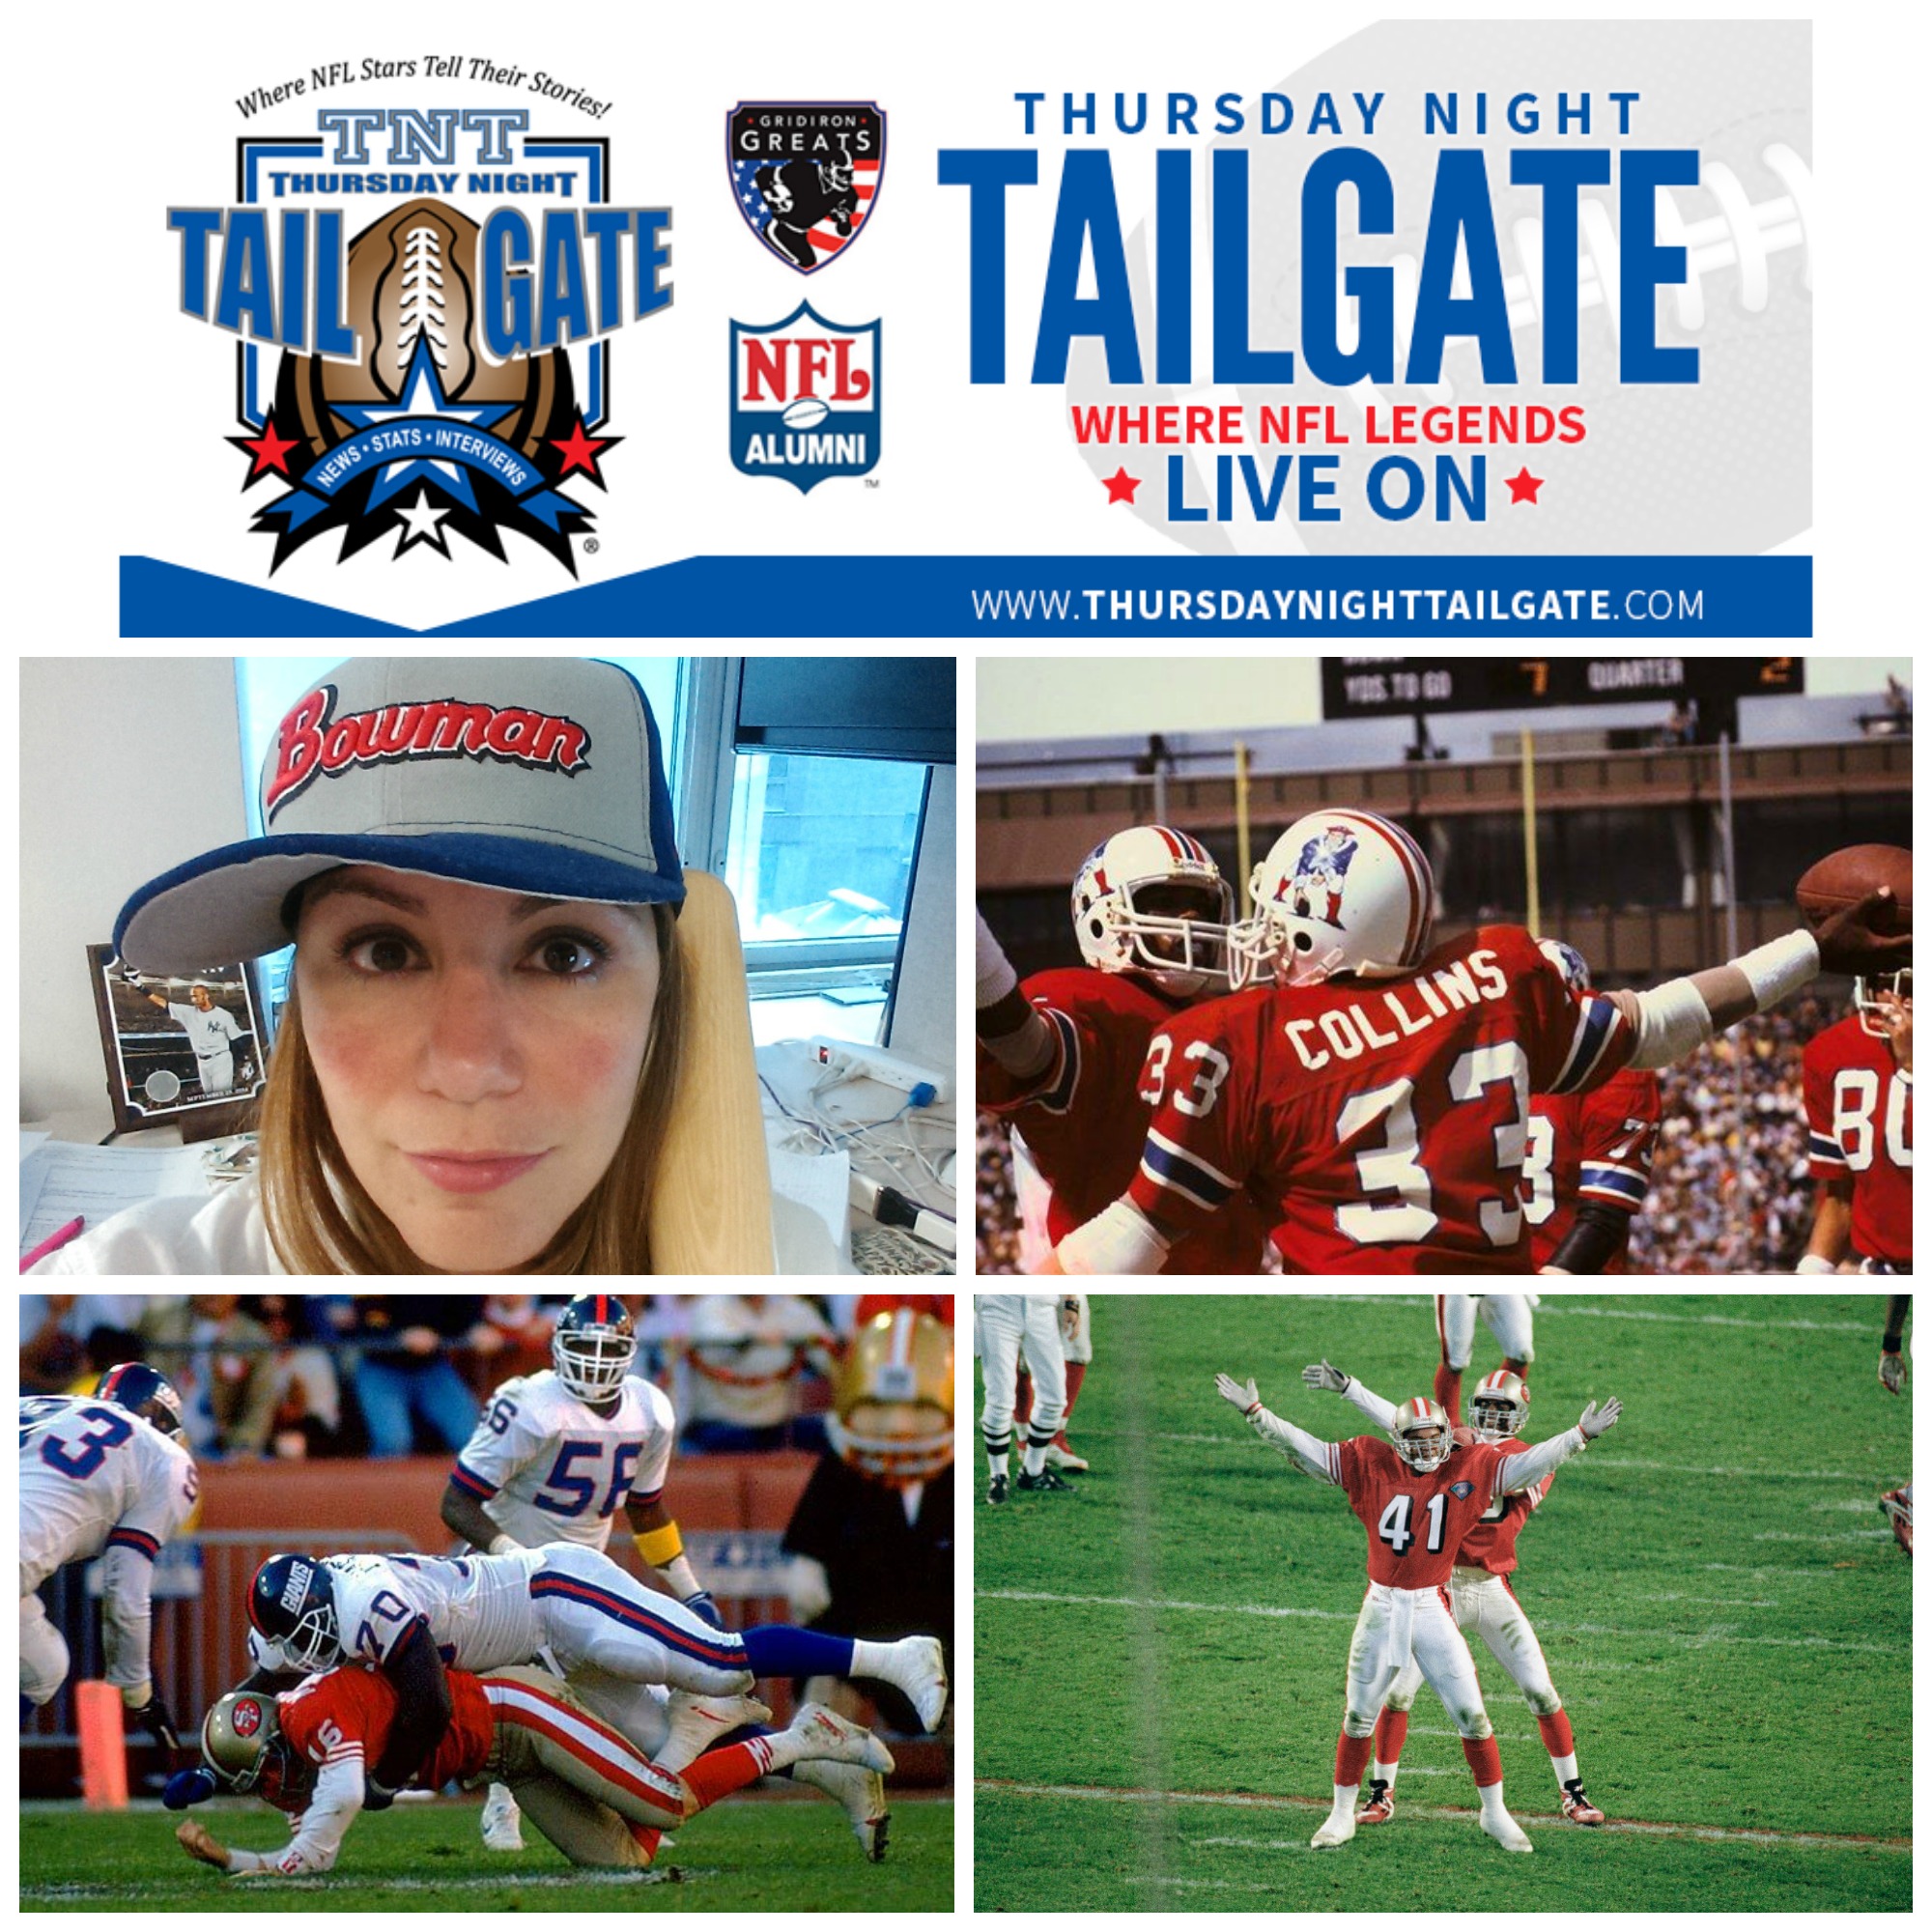 NFL Legends Tony Collins, Leonard Marshall and Toi Cook Plus Topps Marketing Communications Manager Susan Lulgjuraj Join Us...